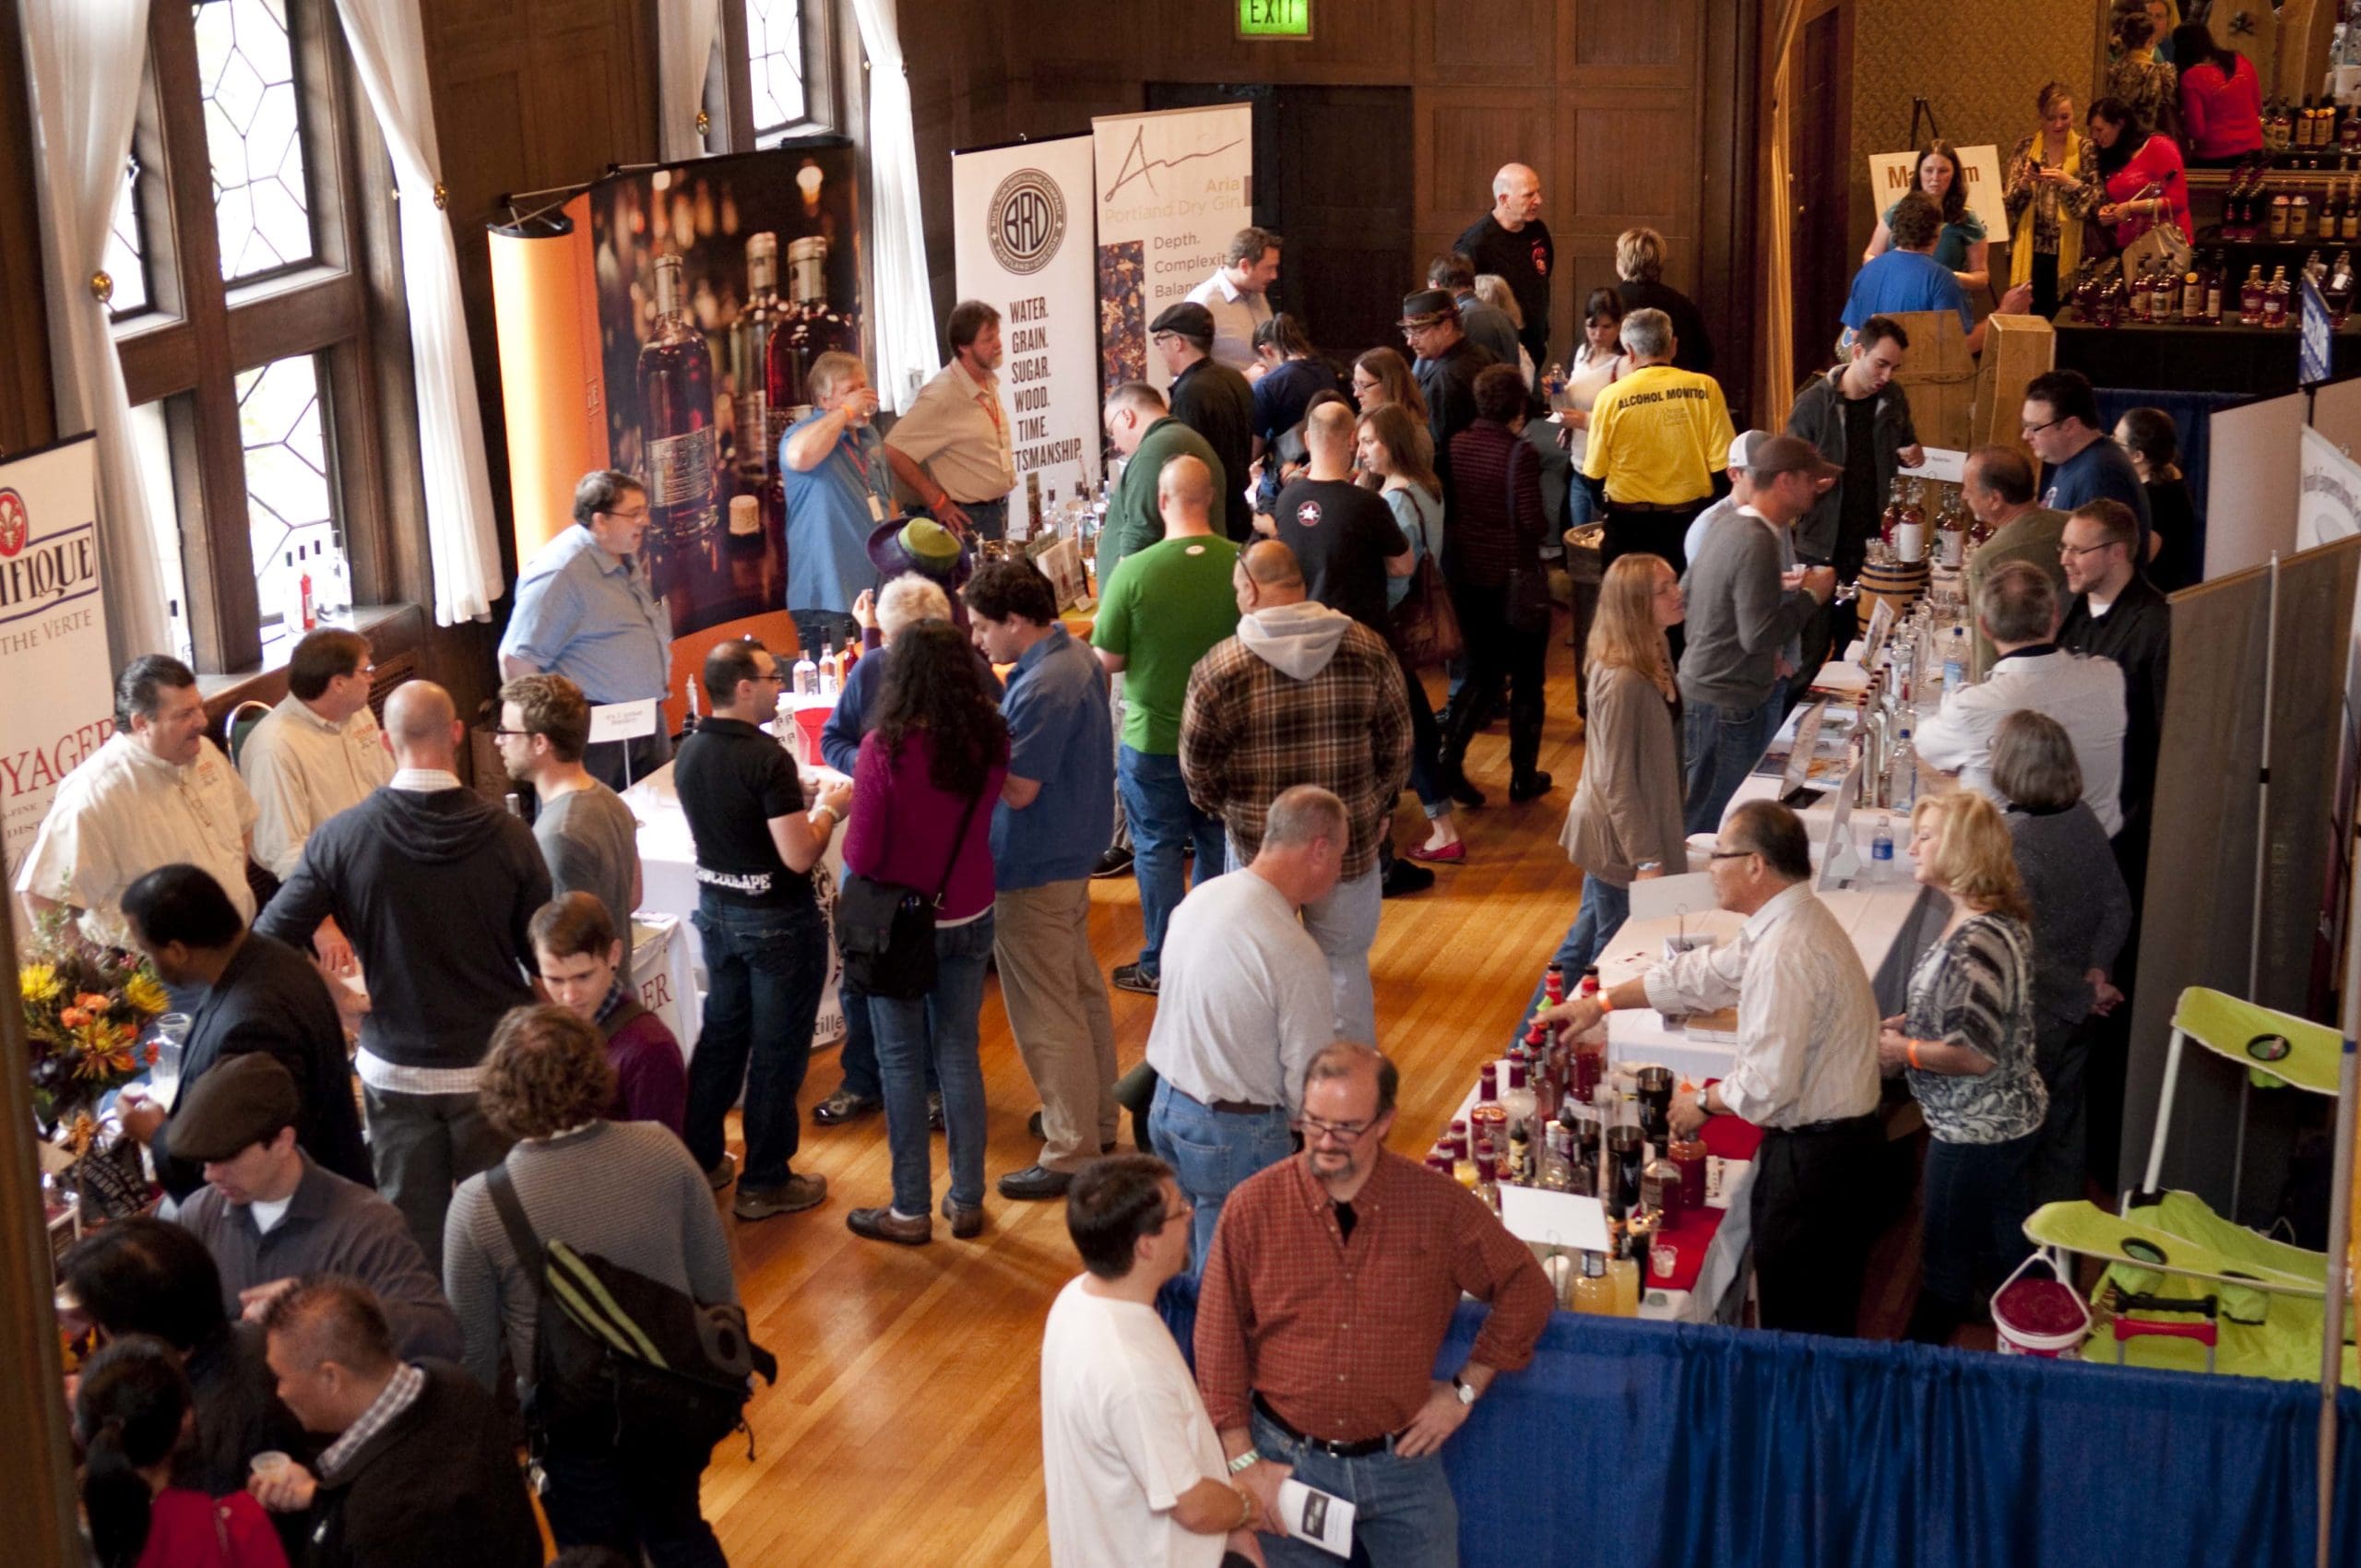 The 9th Annual Great American Distillers Festival